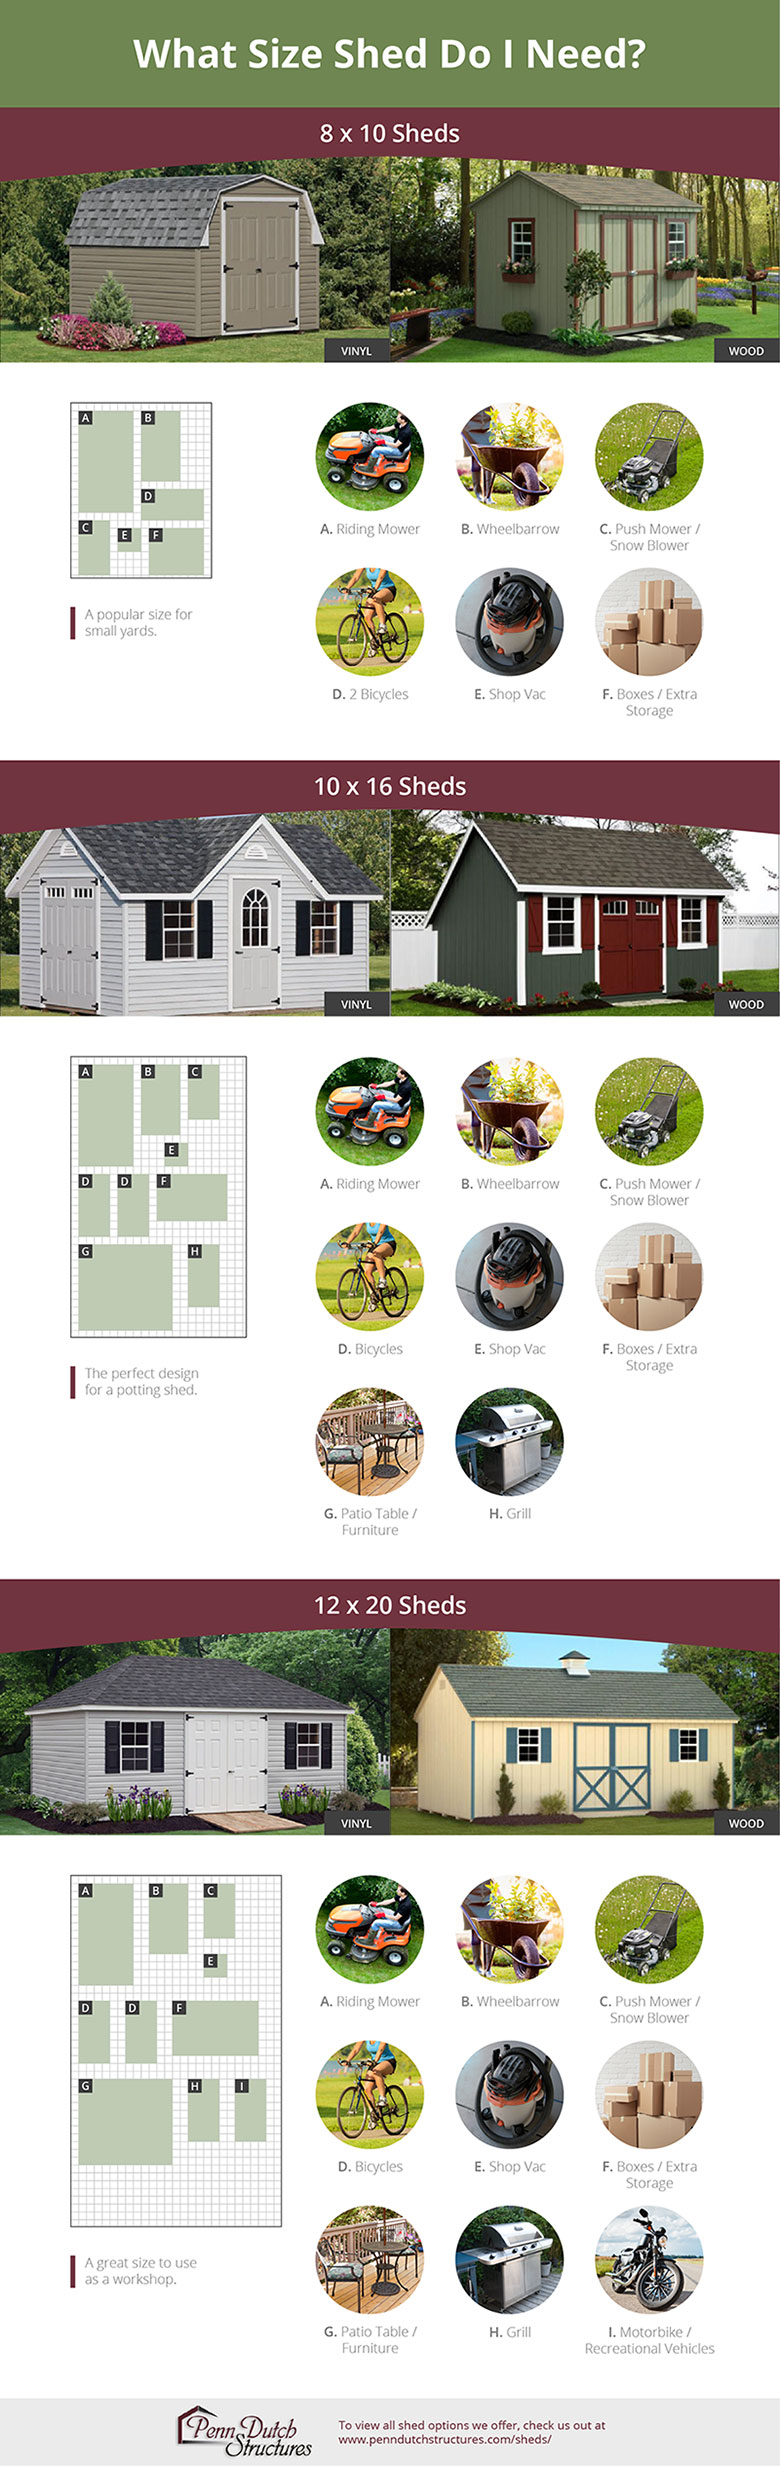 Shed Size Infographic